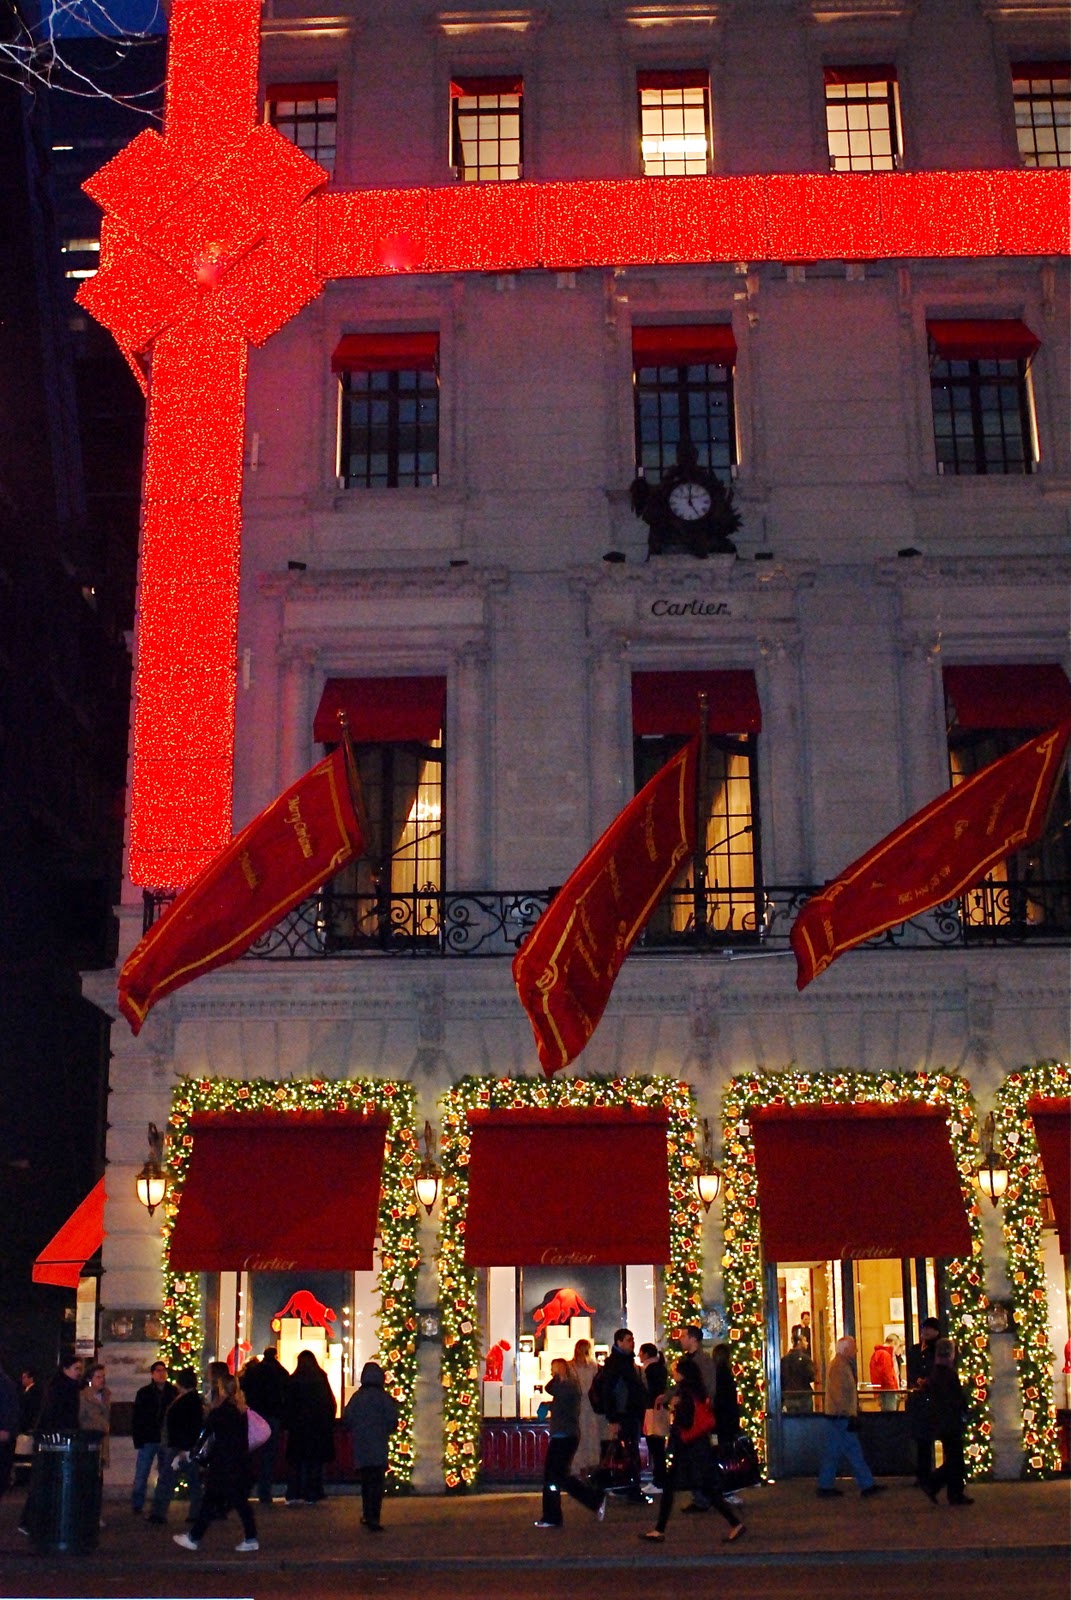 Christmas lights and decorations outside the Cartier Store